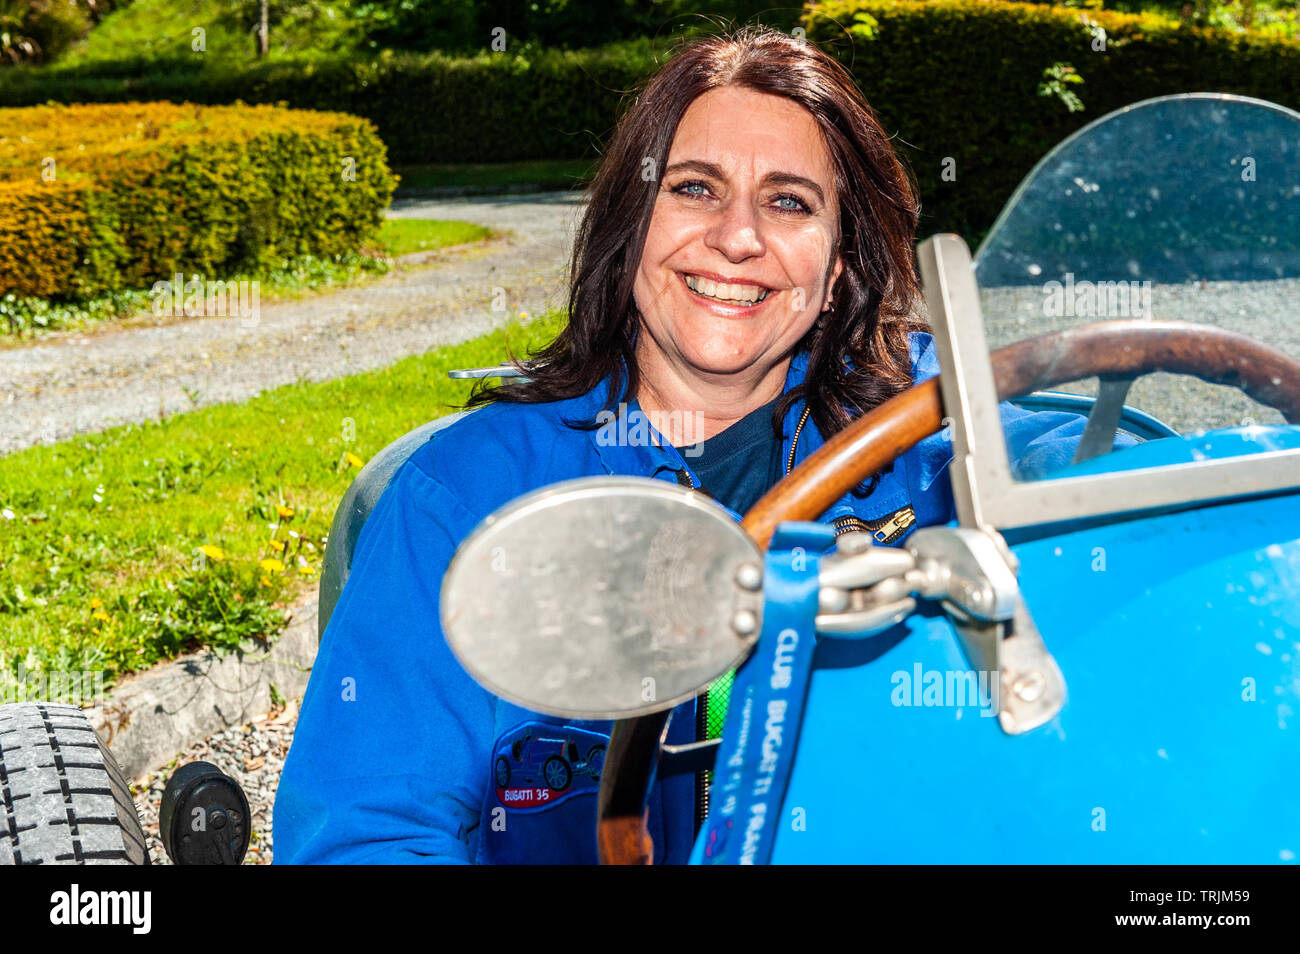 Bantry, West Cork, Ireland. 6th Juine, 2019. The Bugatti Owners Club is in Ireland this week for its annual international rally, featuring 100 vintage Bugatti's. After lunch in the West Lodge Hotel, the cars headed for the Mizen Head. At Bantry House & Gardens was Monica Berkhuyser from Belgium in her Bugatti. Credit: Andy Gibson/Alamy Live News.. Stock Photo